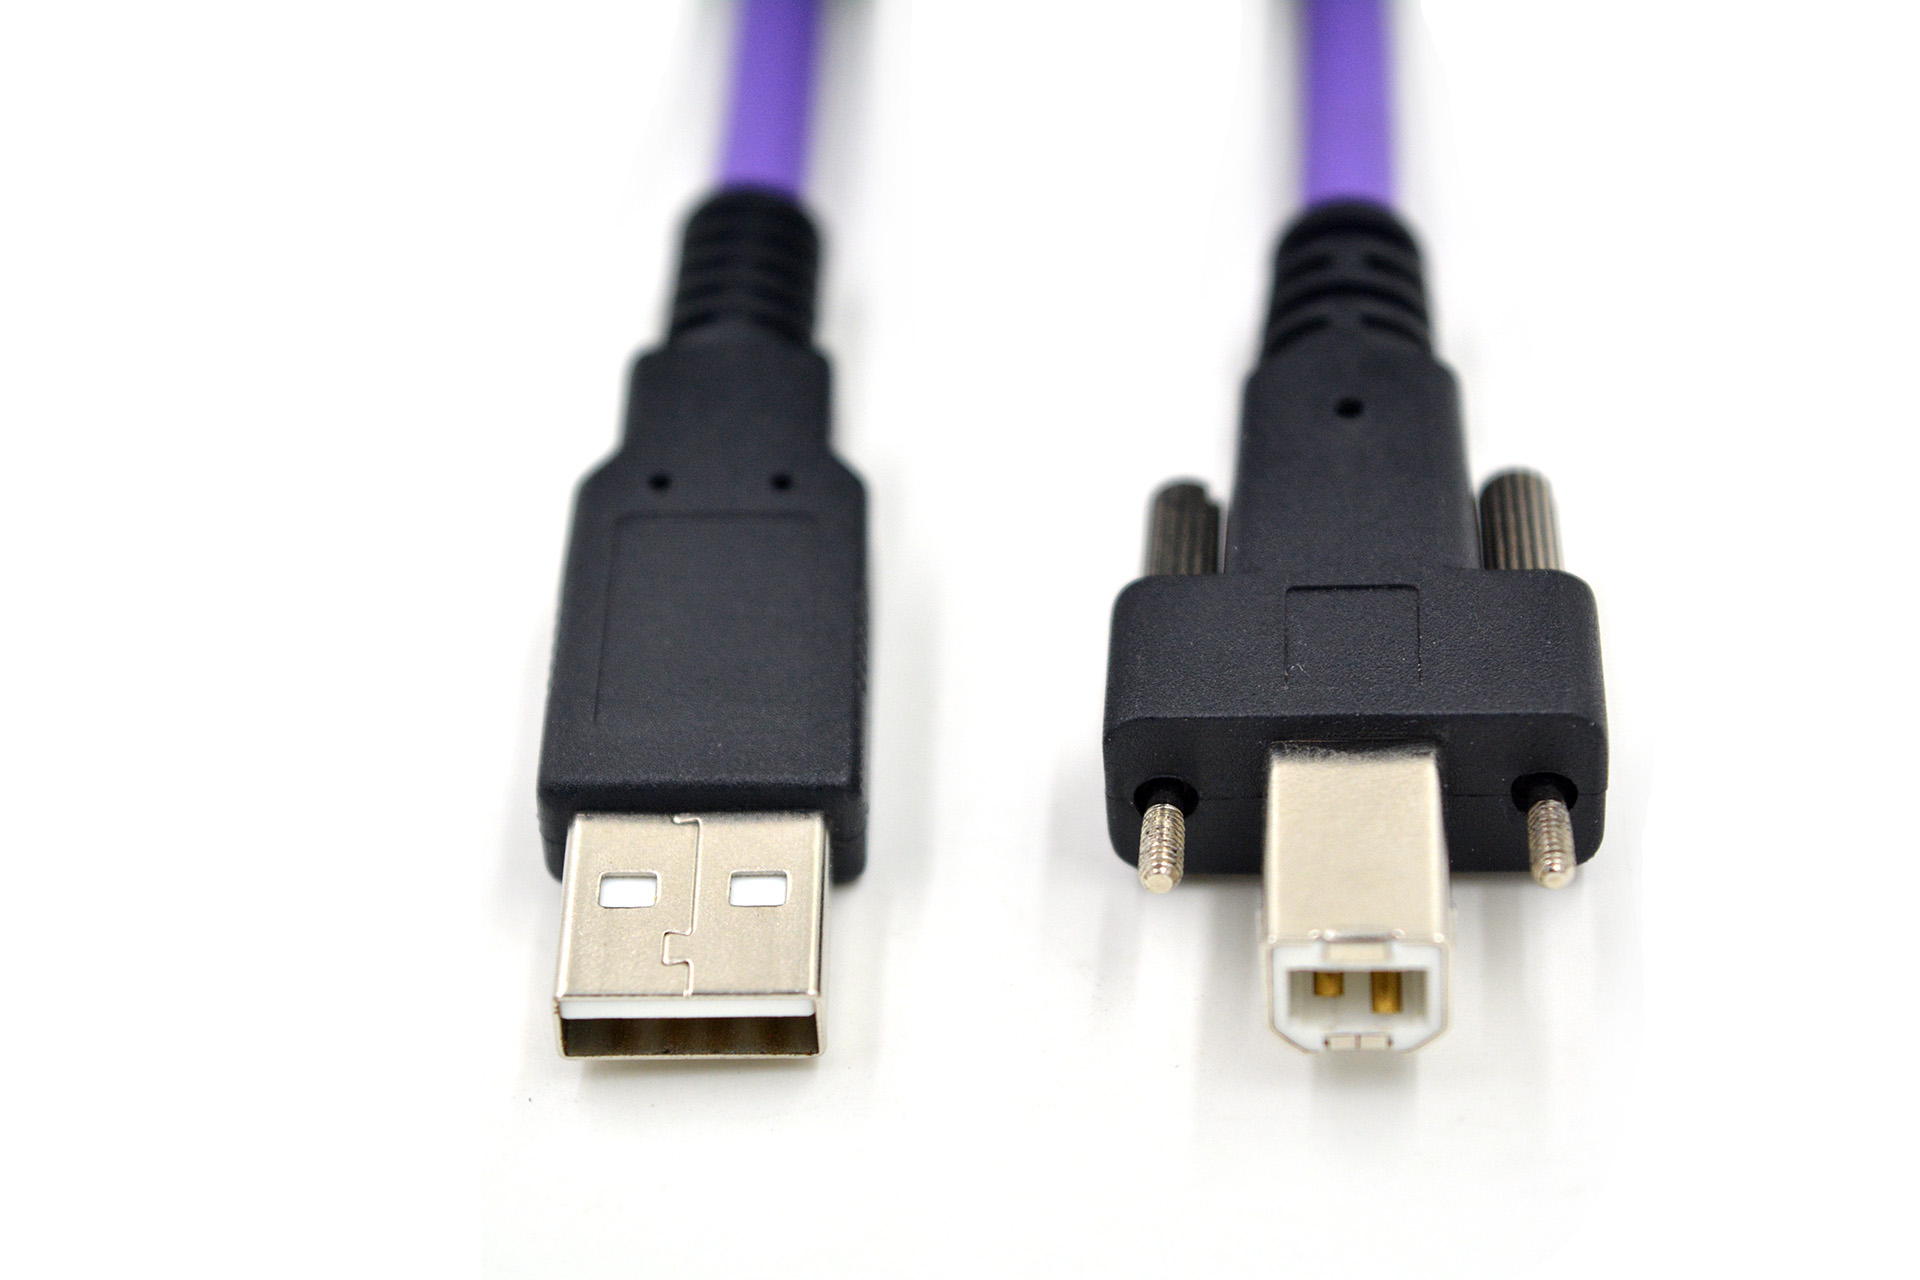 USB2.0 Type-A to Type-B cable with locking screws